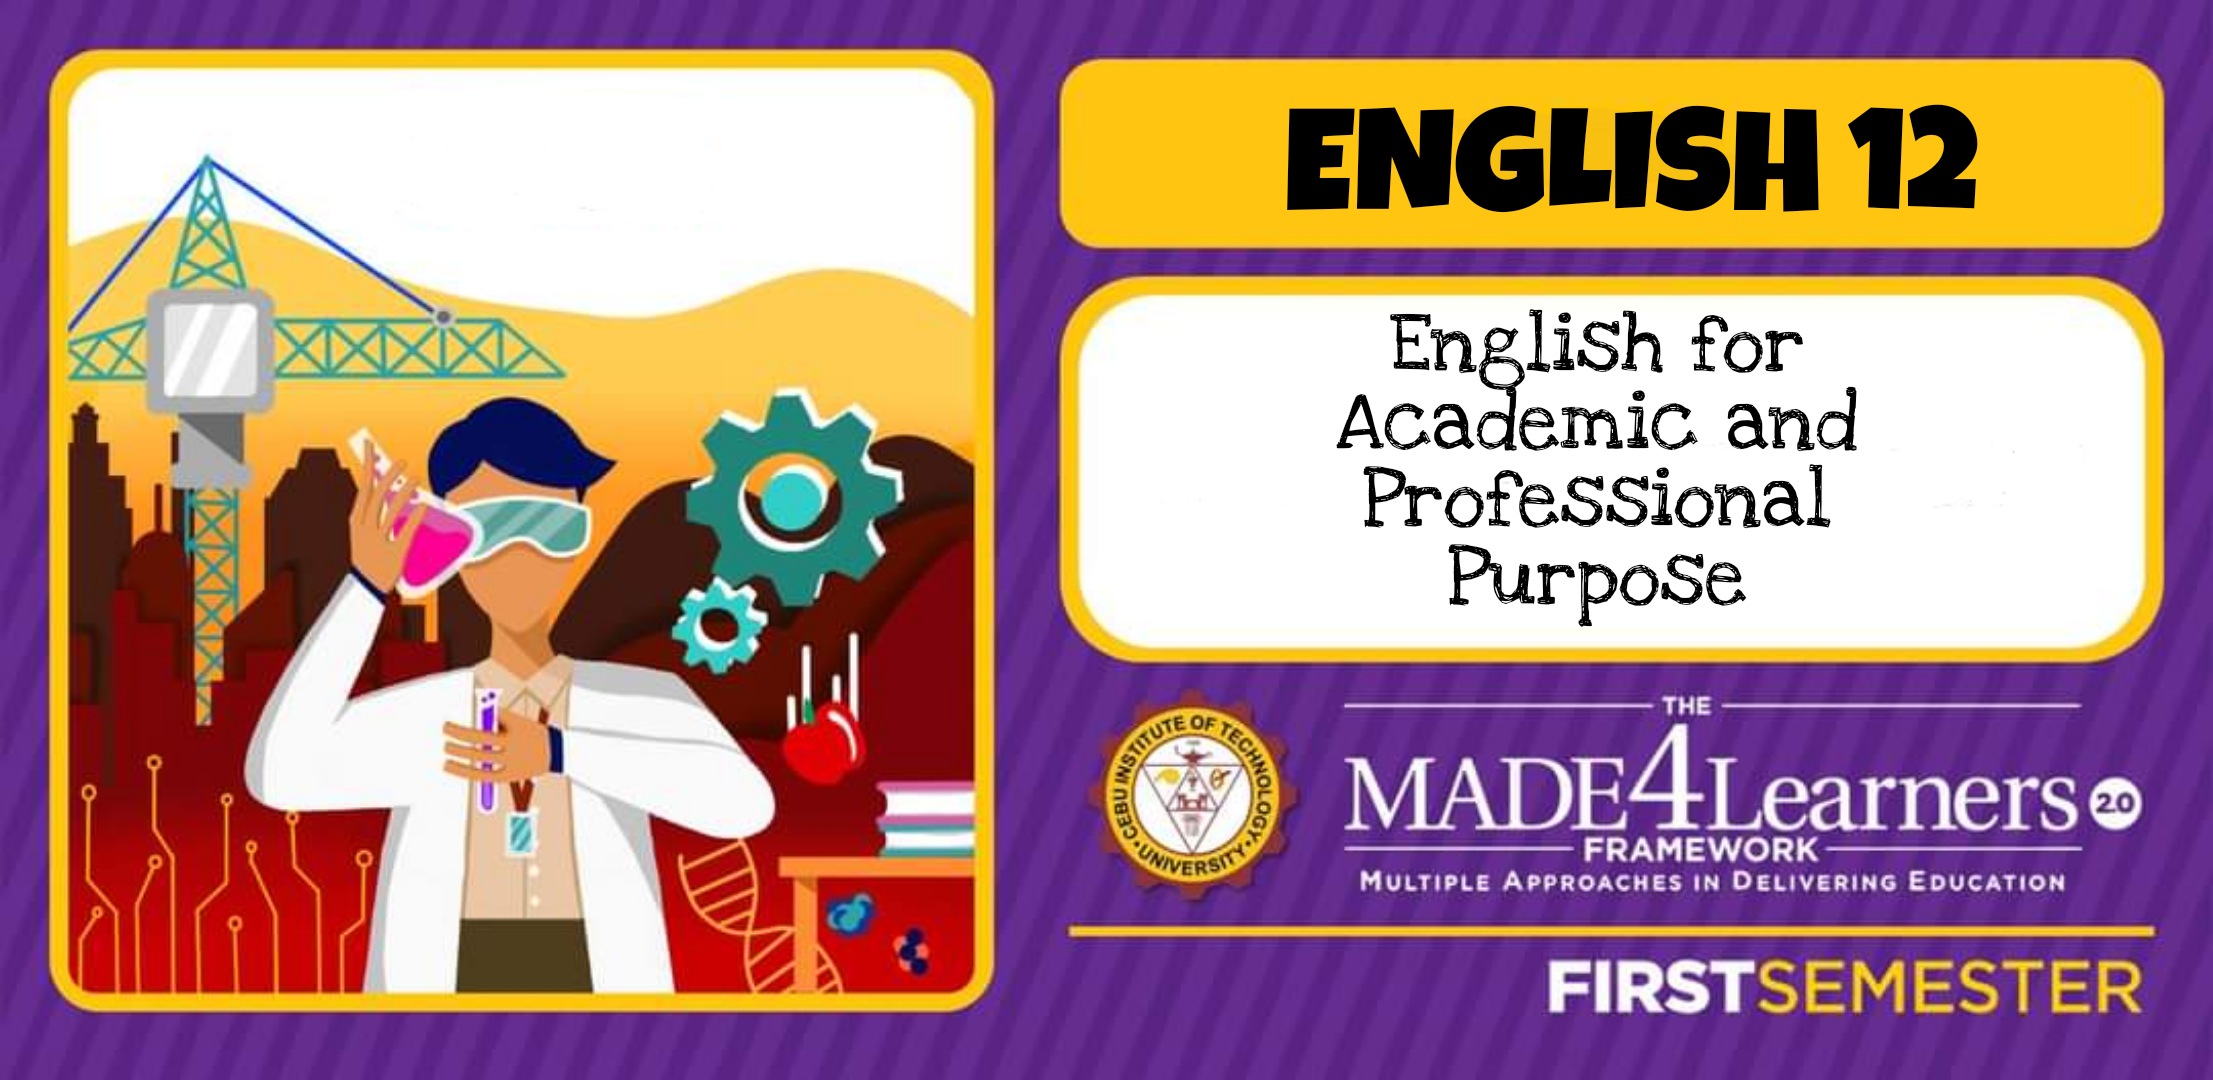 ENGL12A: English for Academic and Educational Purposes